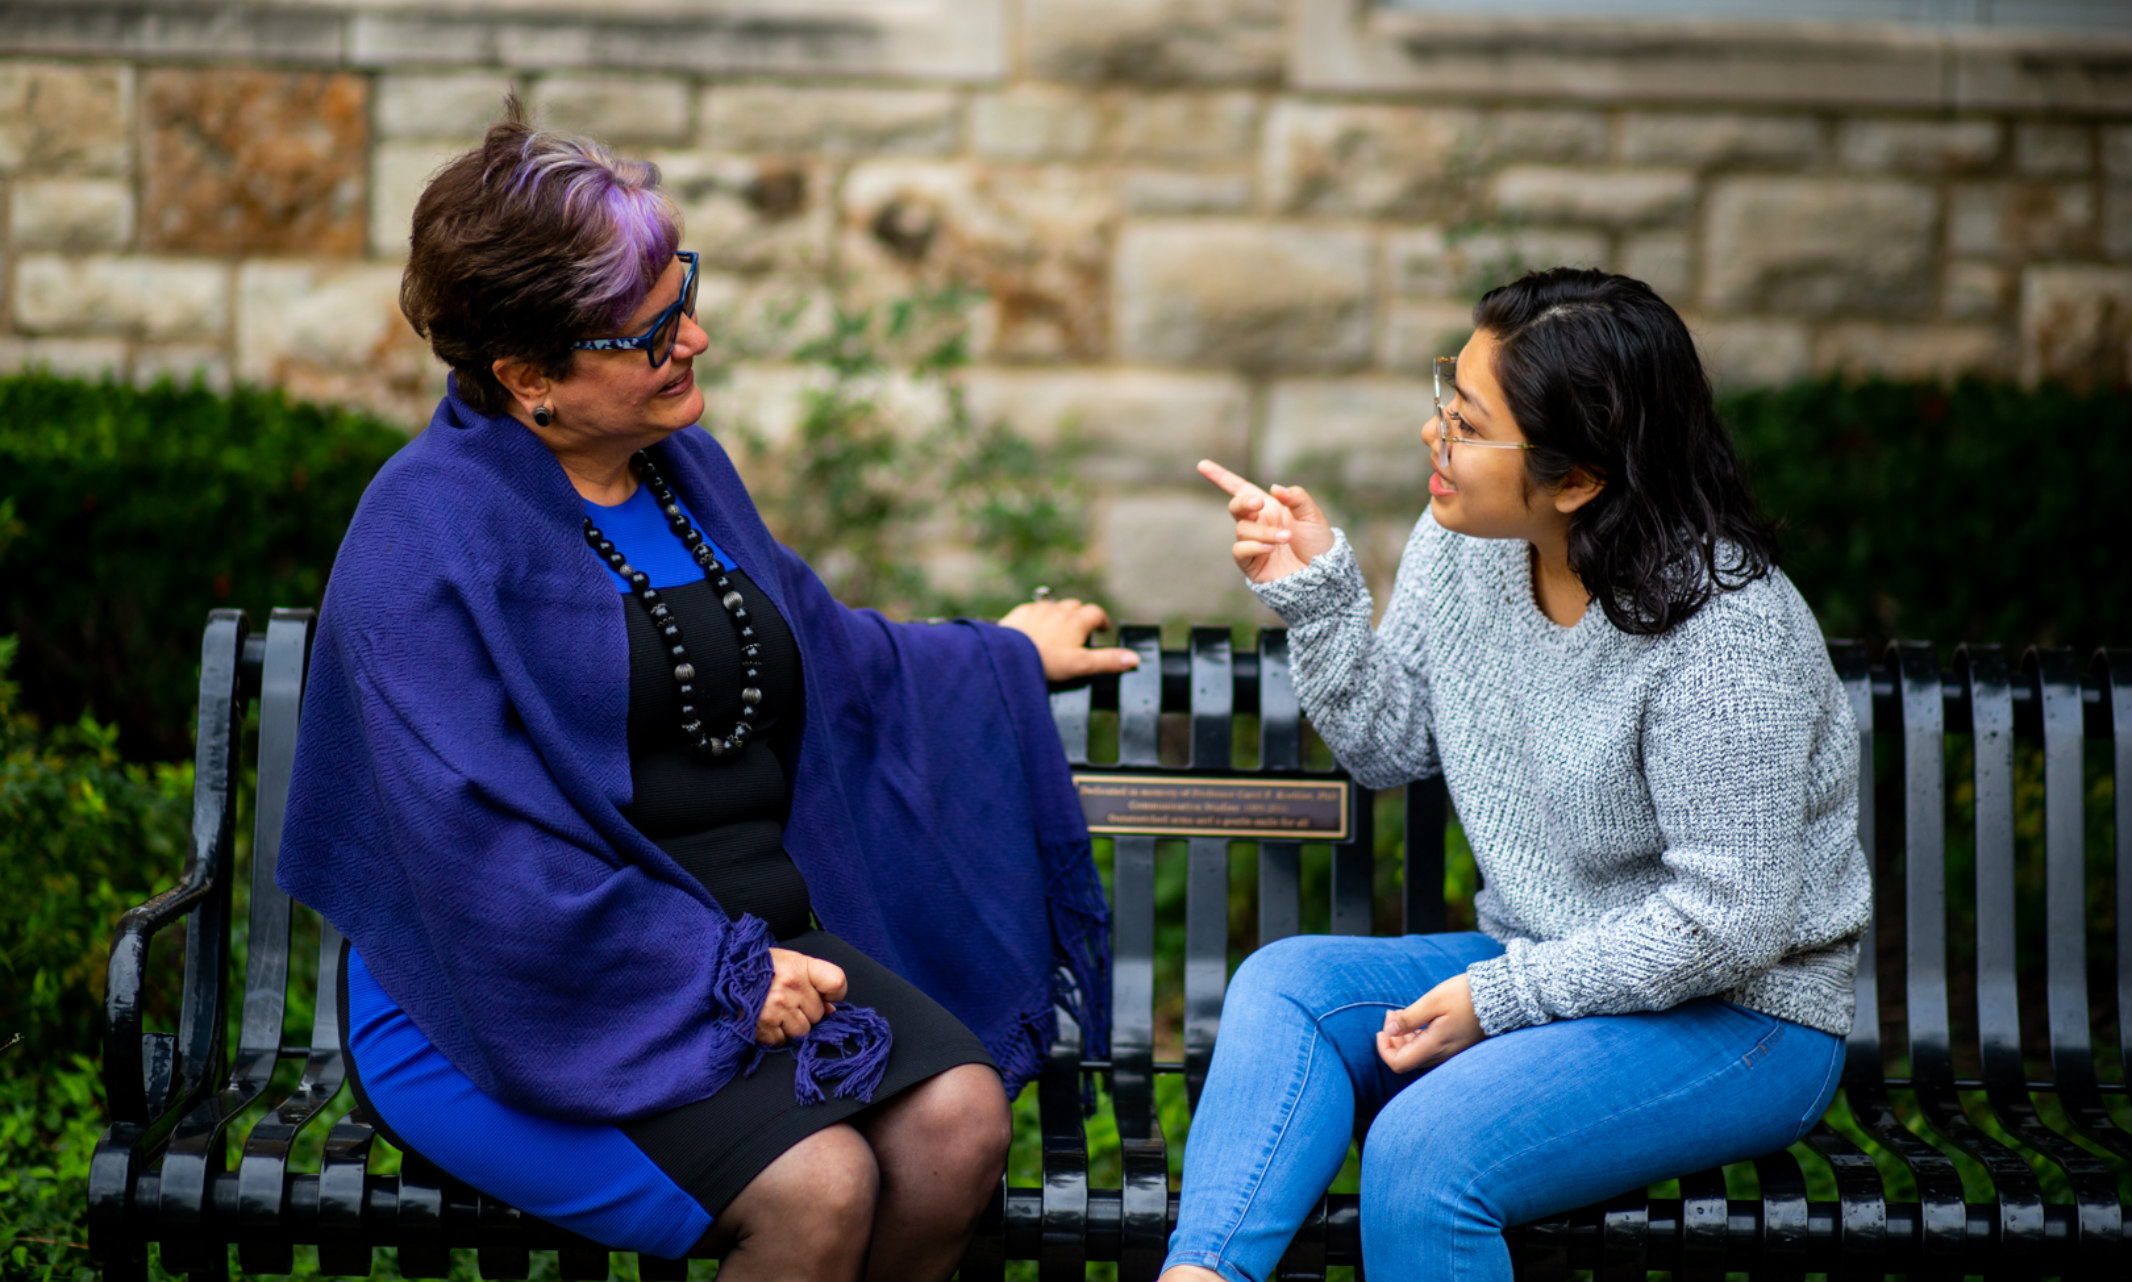 Through Avanzando, Aricela Guadalupe was connected with Clara Irazábal-Zurita, director of the Latinx and Latin American Studies Program and a professor in the Department of Architecture, Urban Planning + Design. 